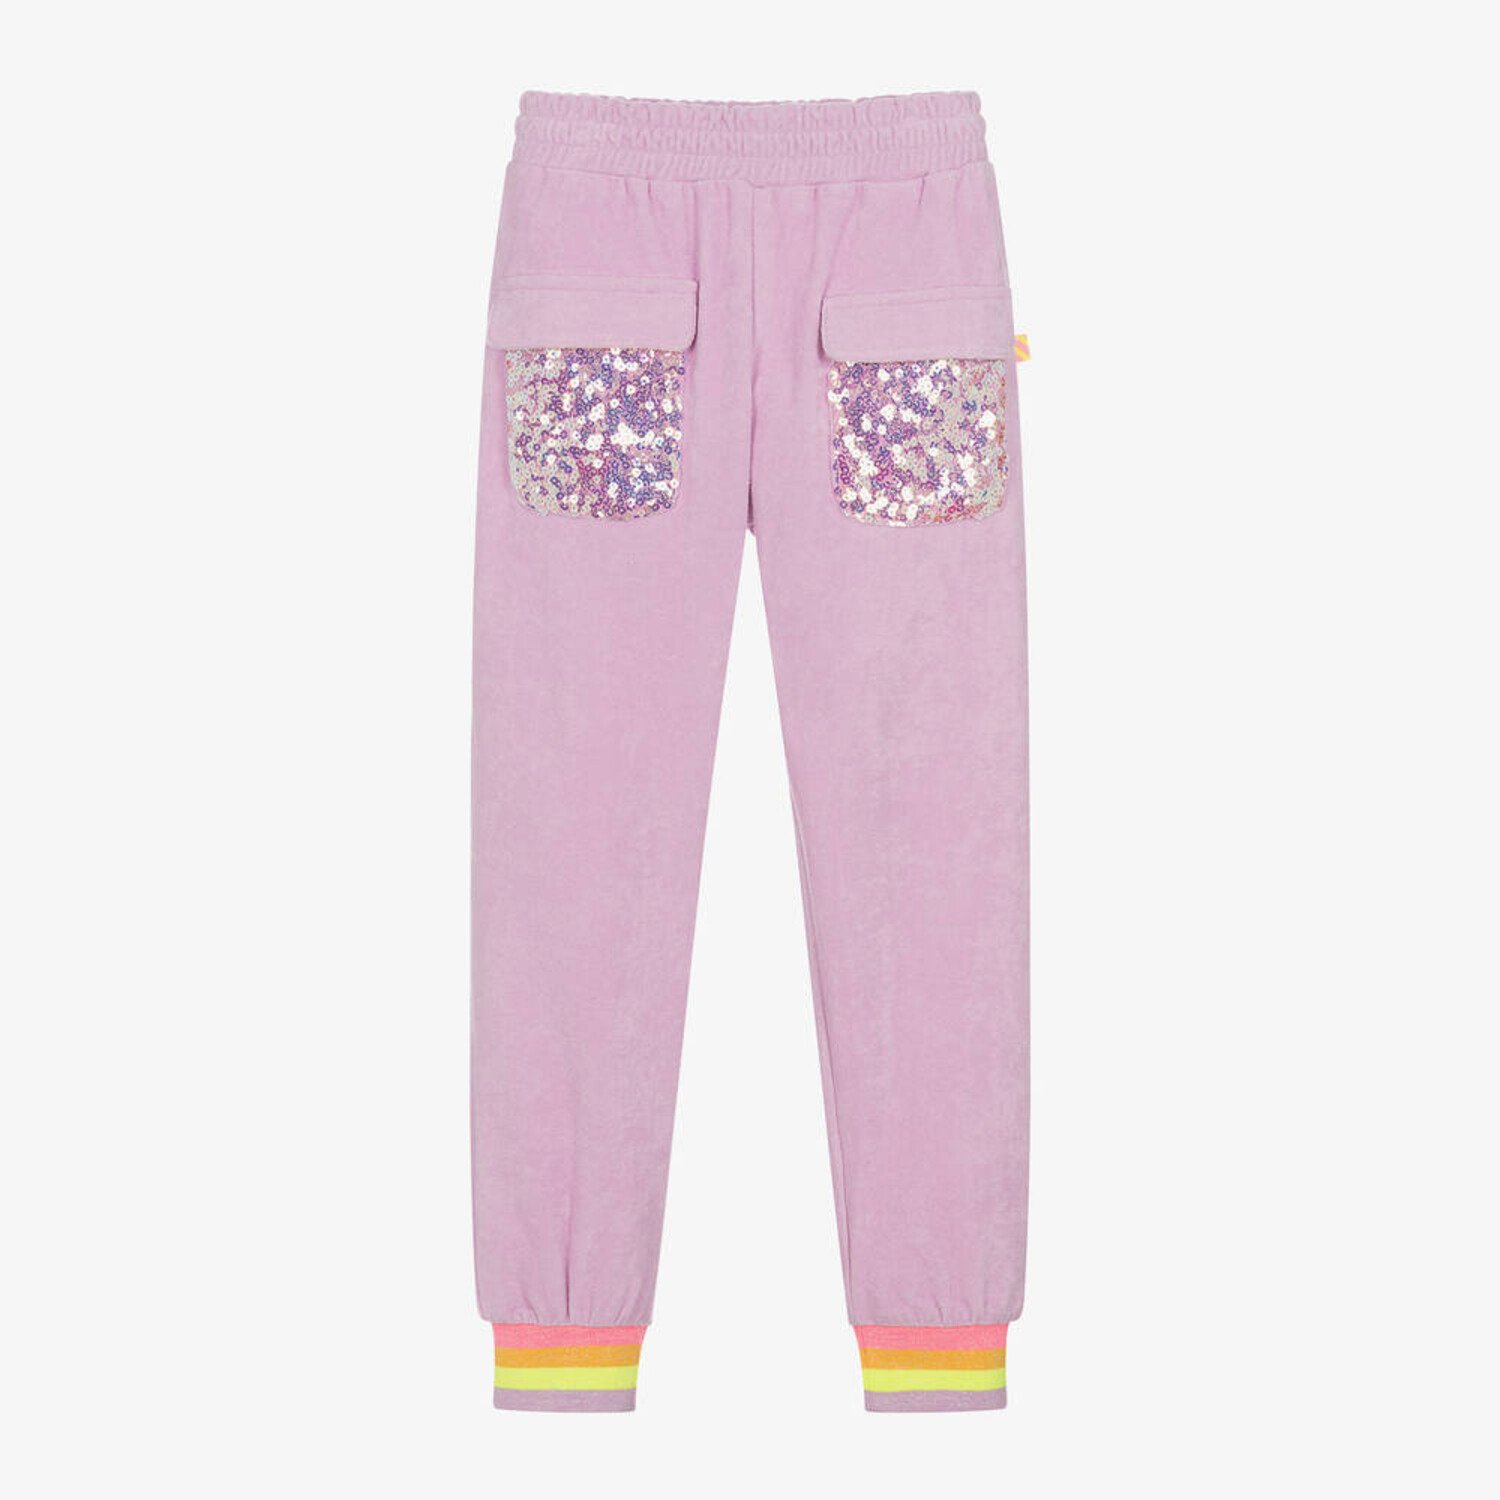 Pink joggers with glitter star on the front